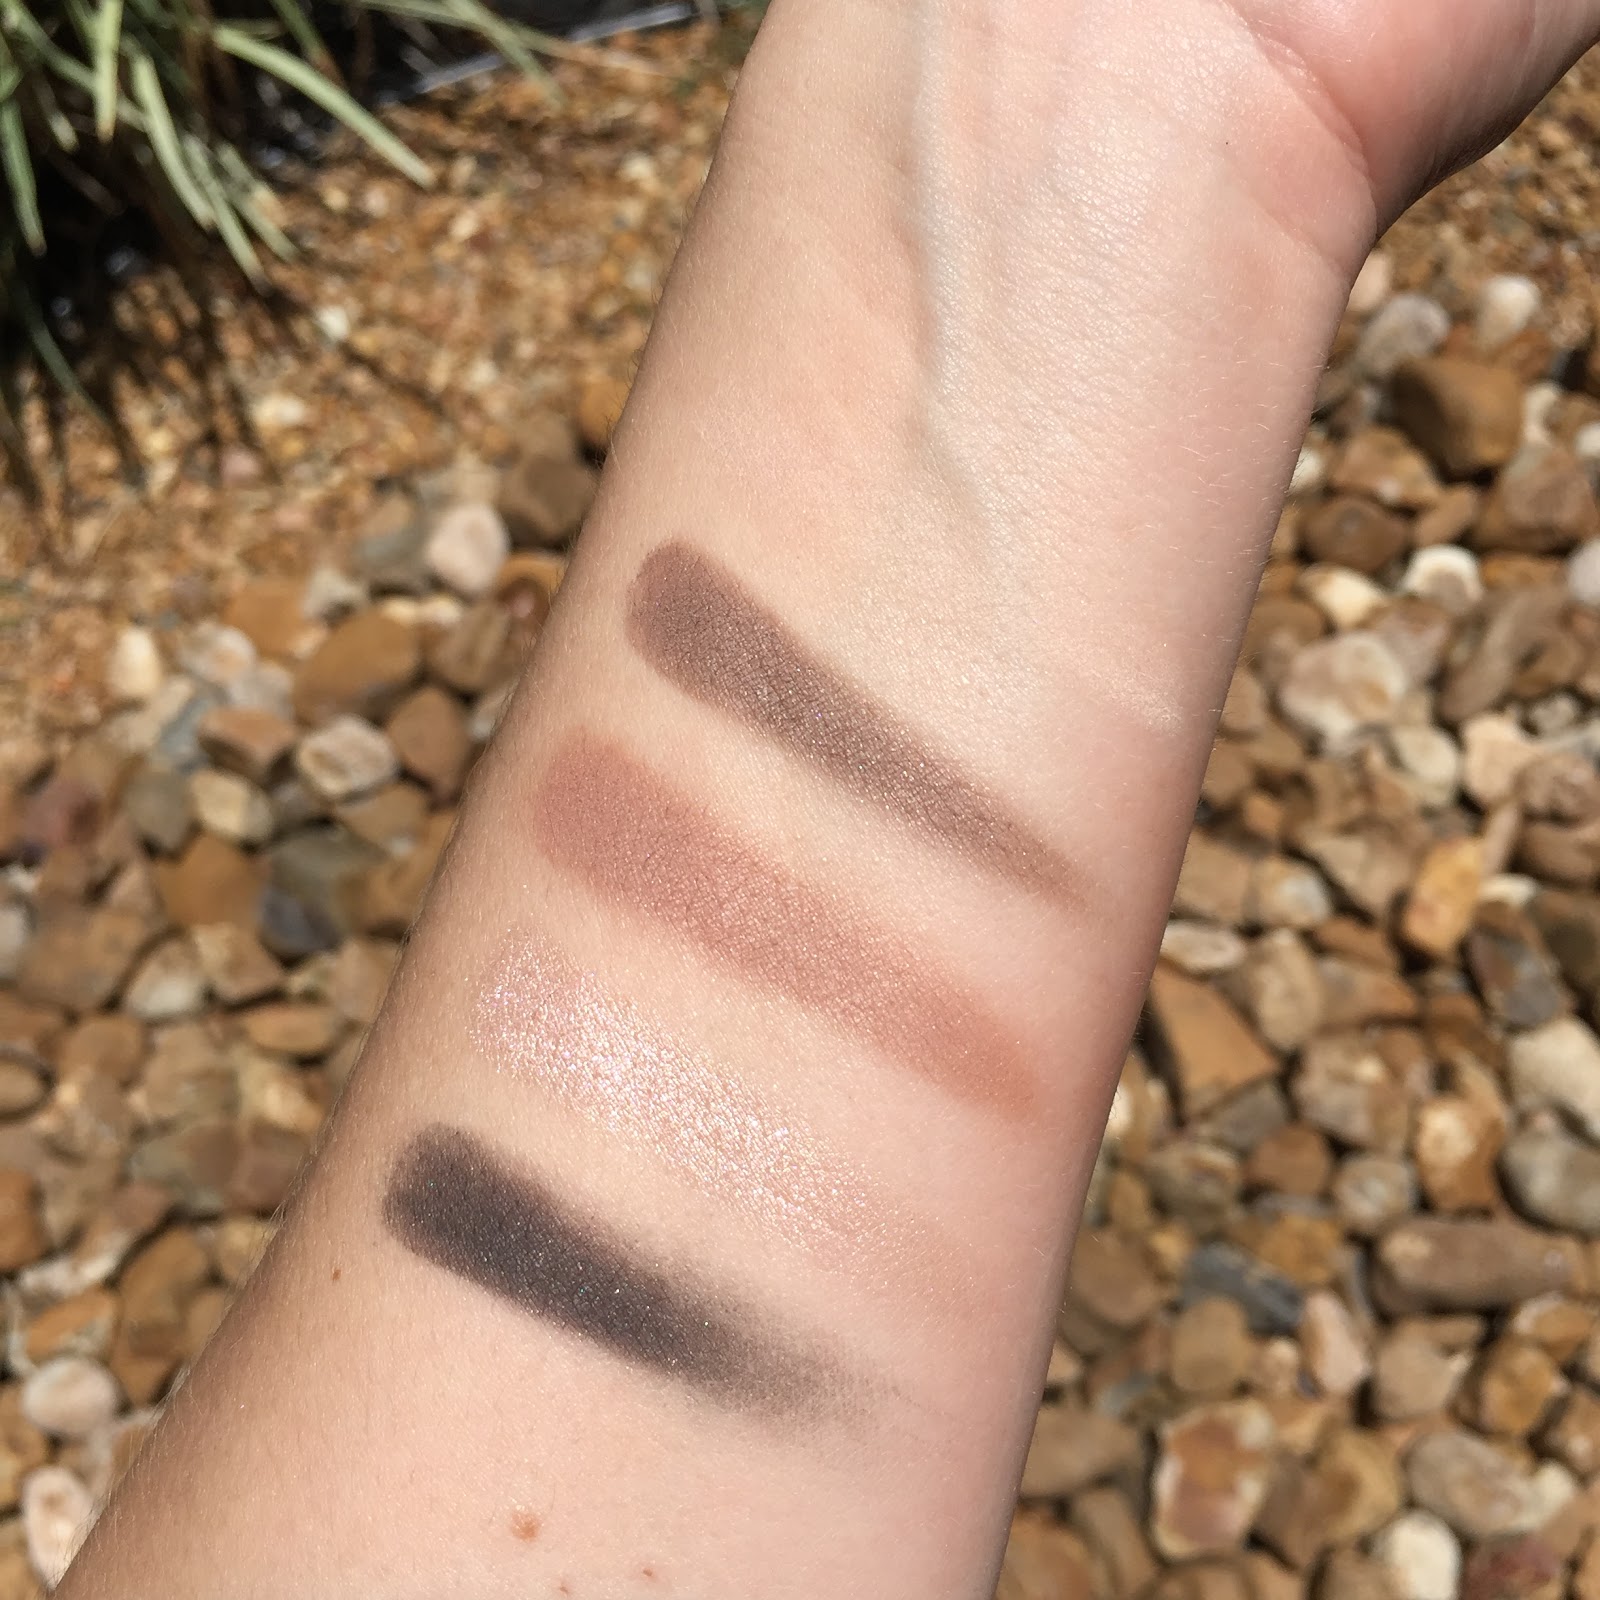 Chanel Les Beiges Healthy Glow Natural Eyeshadow Palette: Review